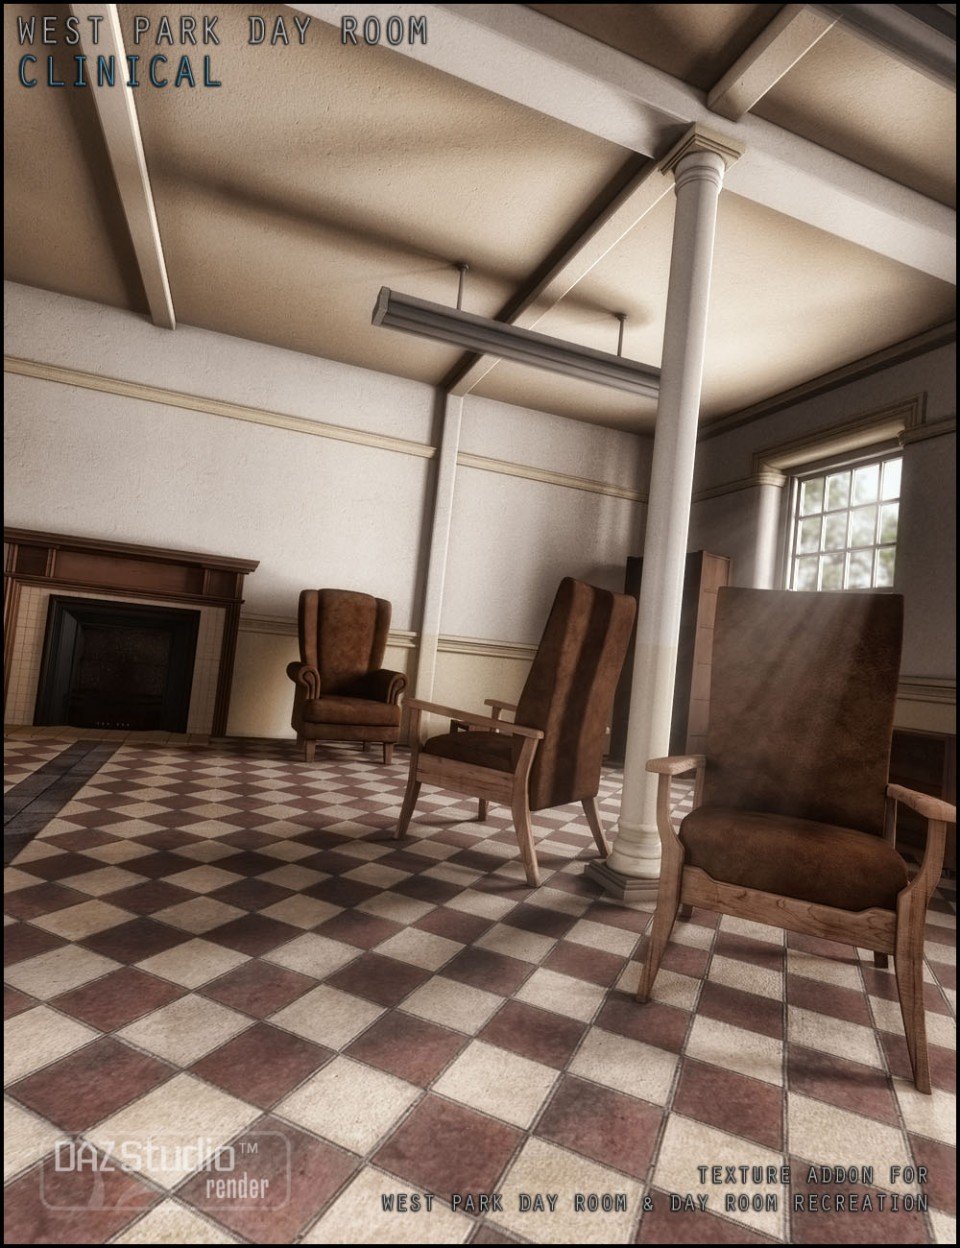 West Park Day Room Clinical_DAZ3DDL